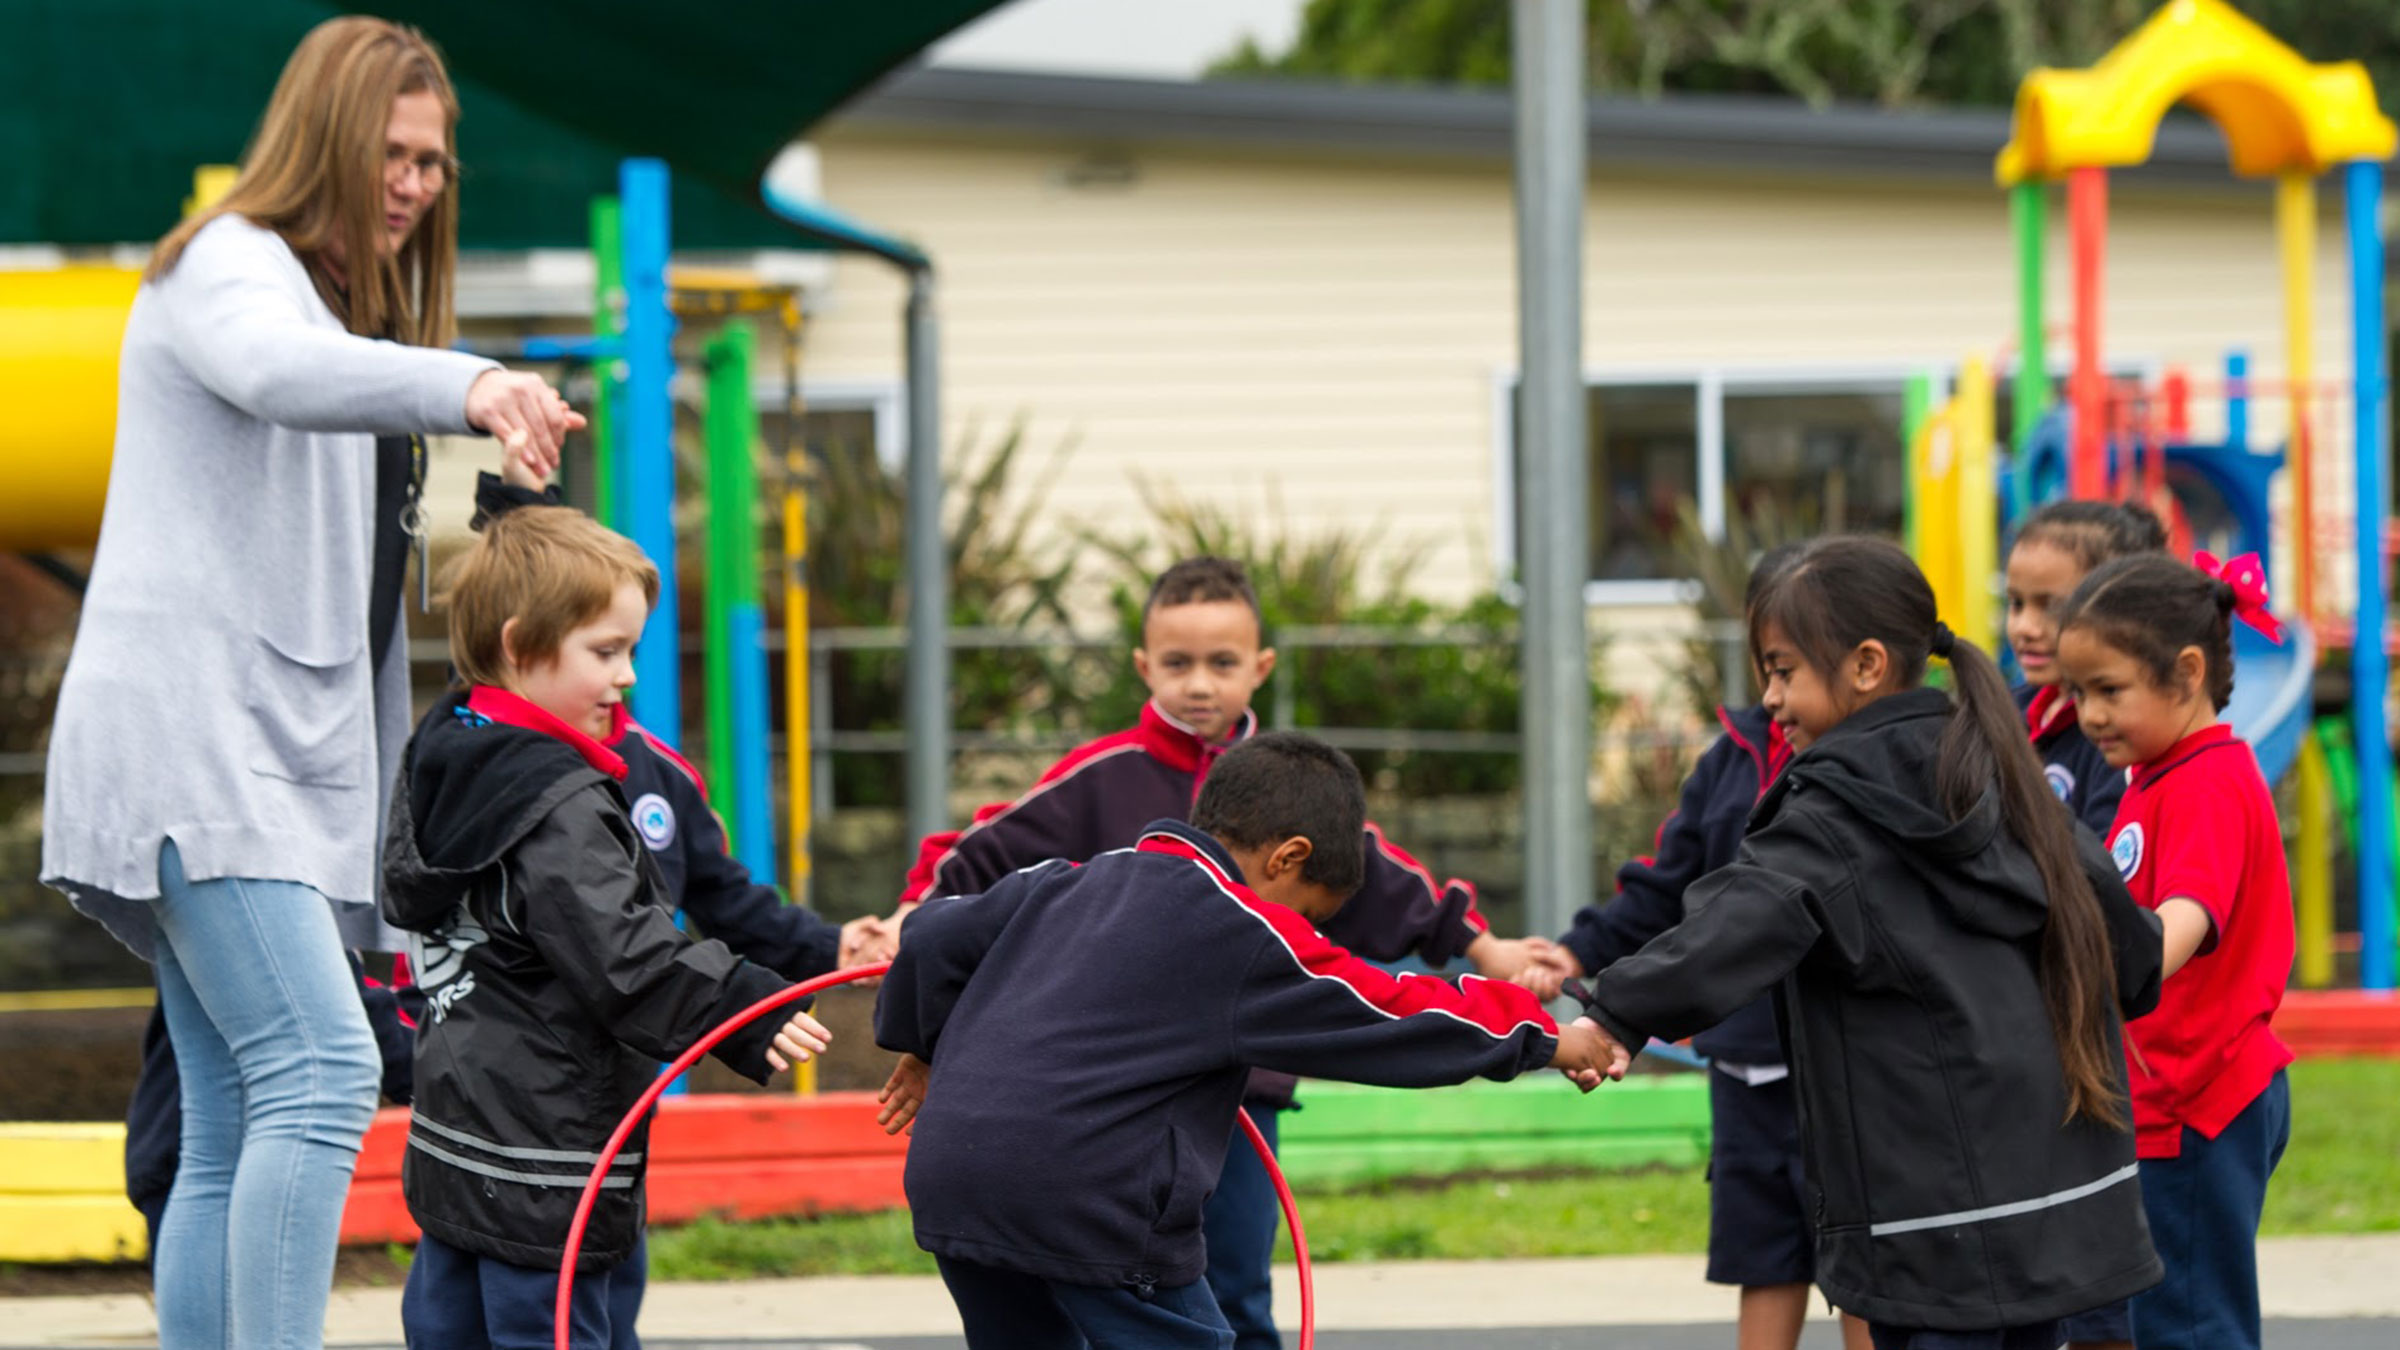 A group of young children playing a game with a hula hoop.